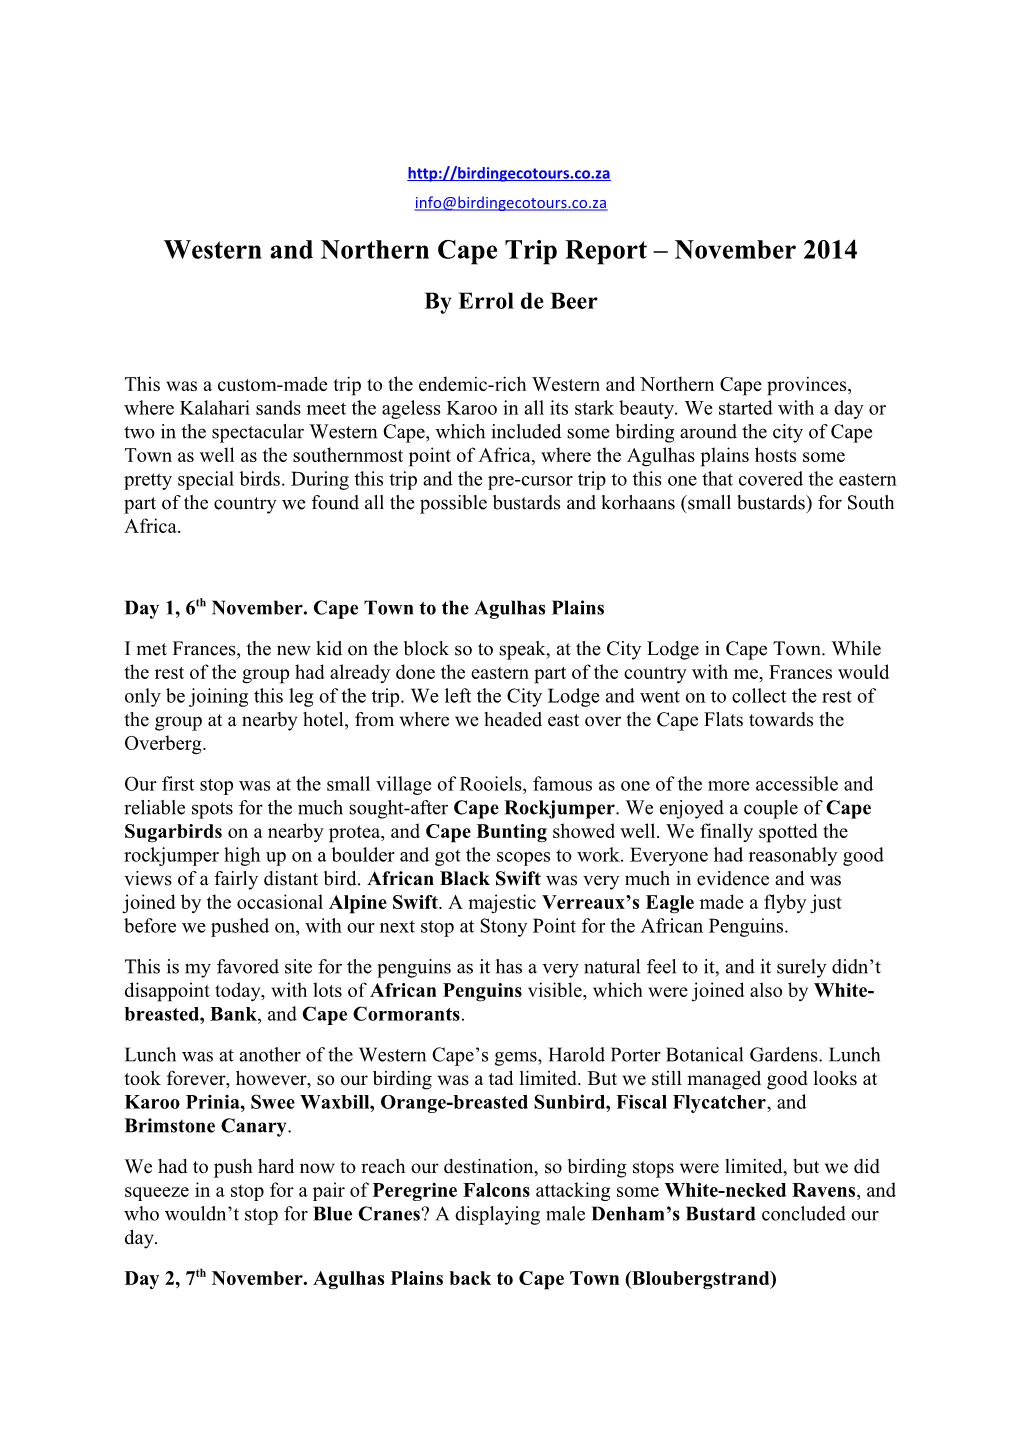 Western and Northern Cape Trip Report November 2014